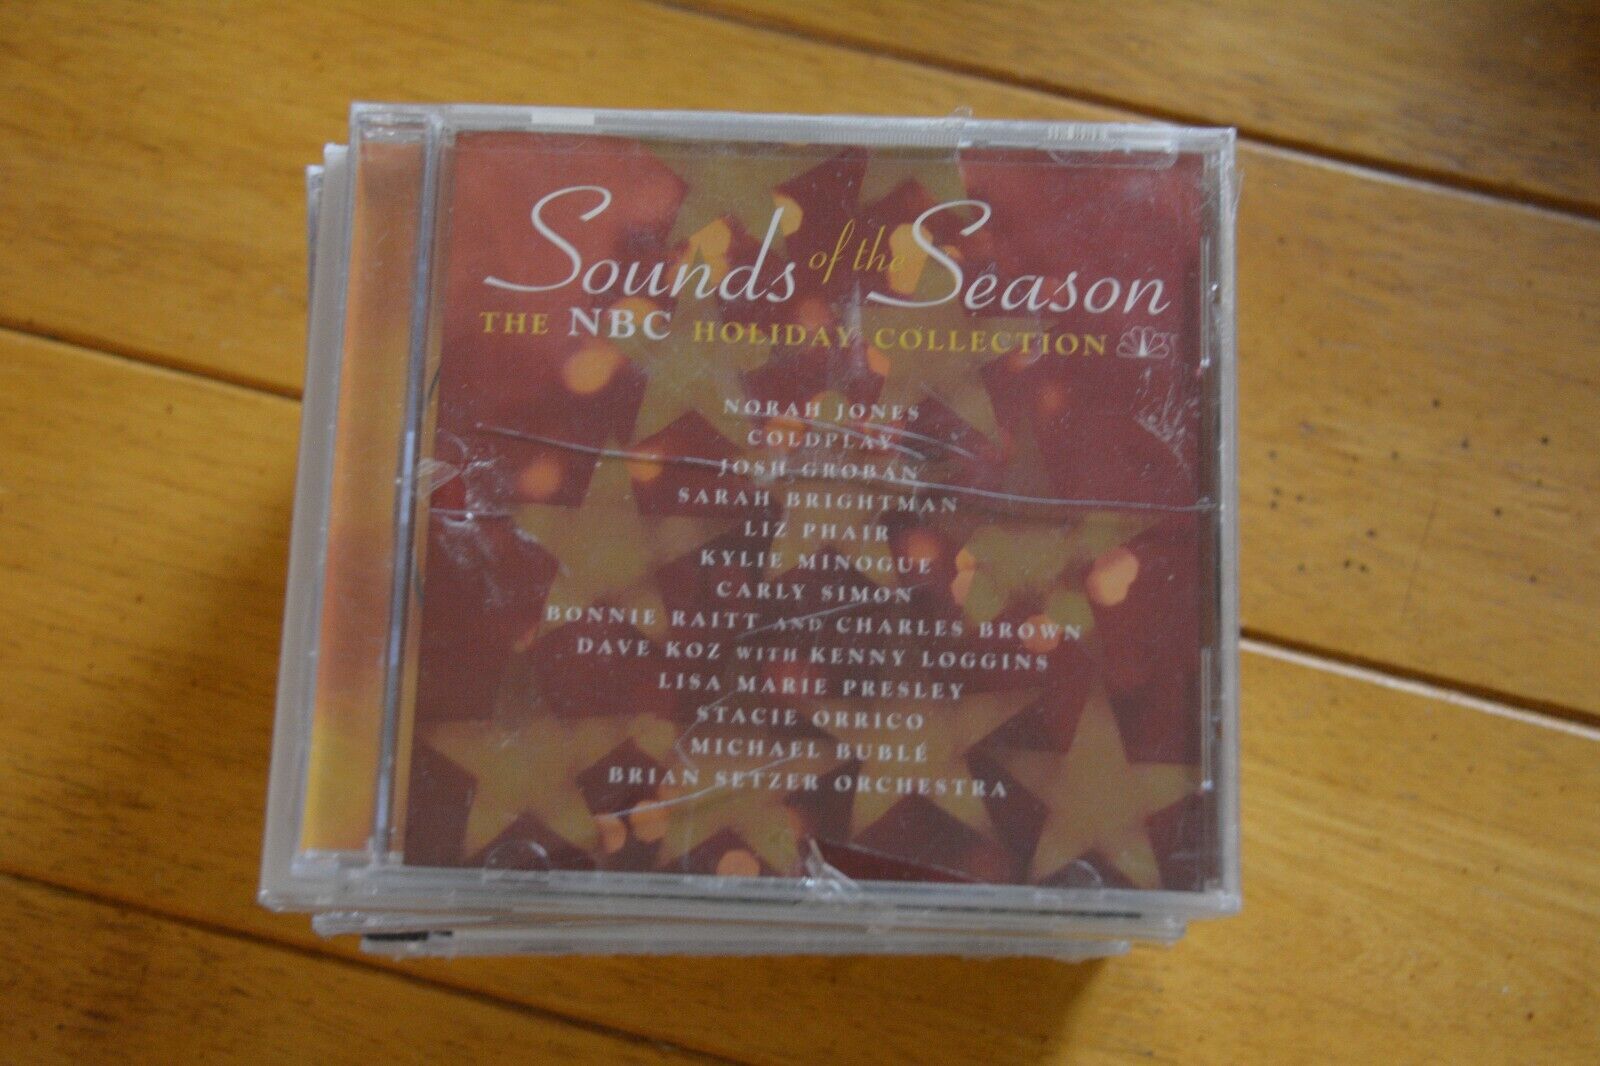 VARIOUS "SOUNDS OF THE SEASON" AUDIO CD [NEW] CASE CRACK [166]